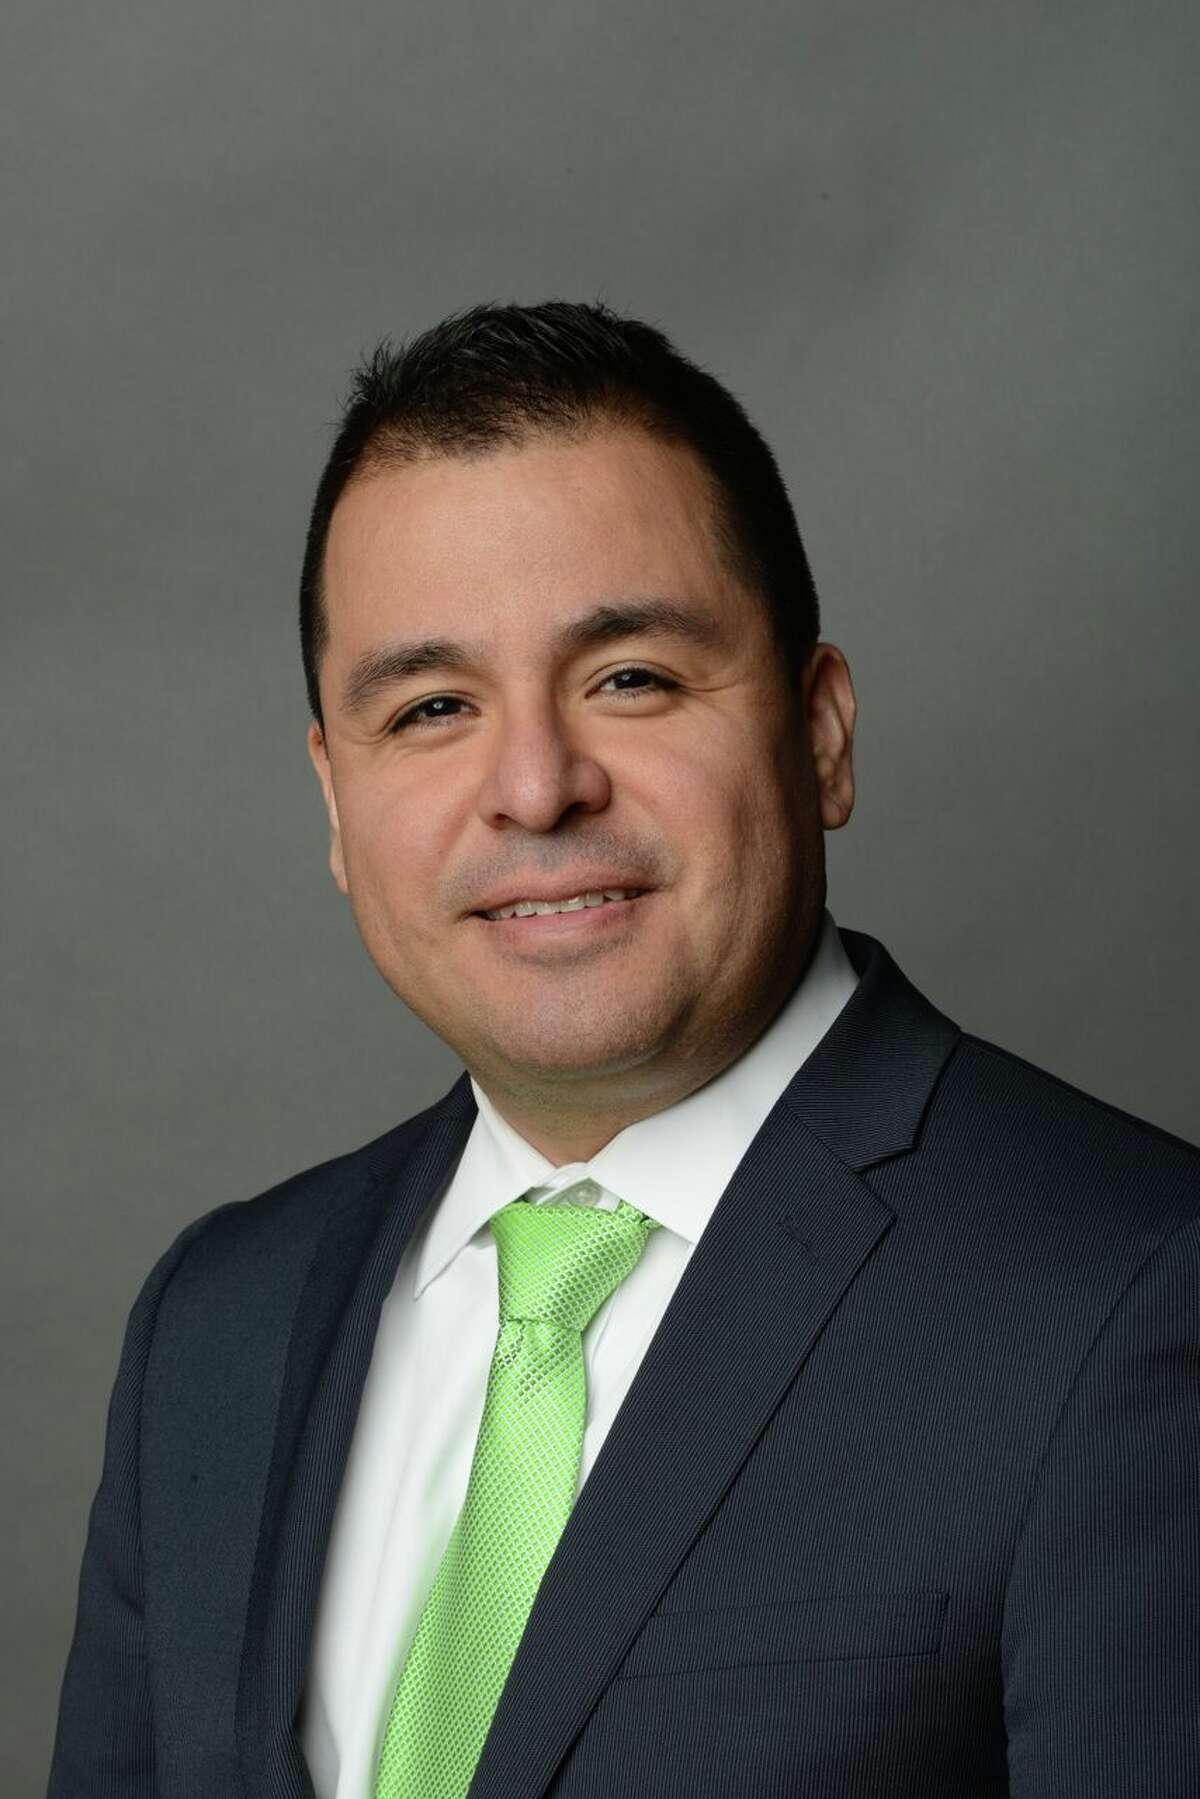 Frank Rodriguez, principal of K.T. Murphy Elementary School, is expected to be named the first principal of the the Rogers Magnet School Expansion next week.